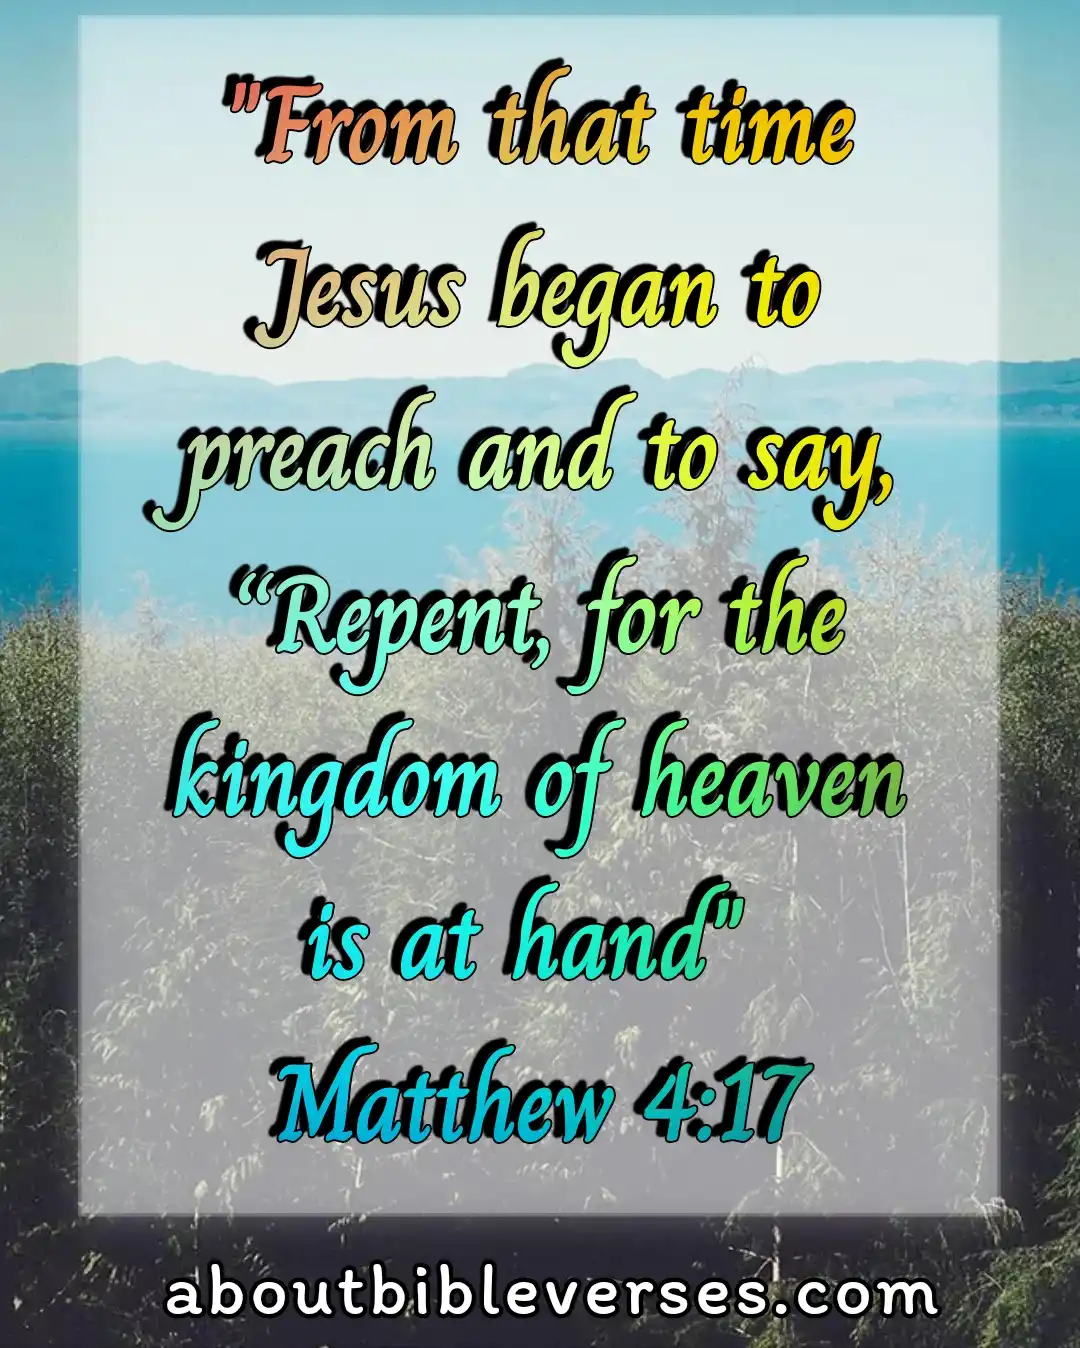 Bible Verses For Repentance And Forgiveness (Matthew 4:17)